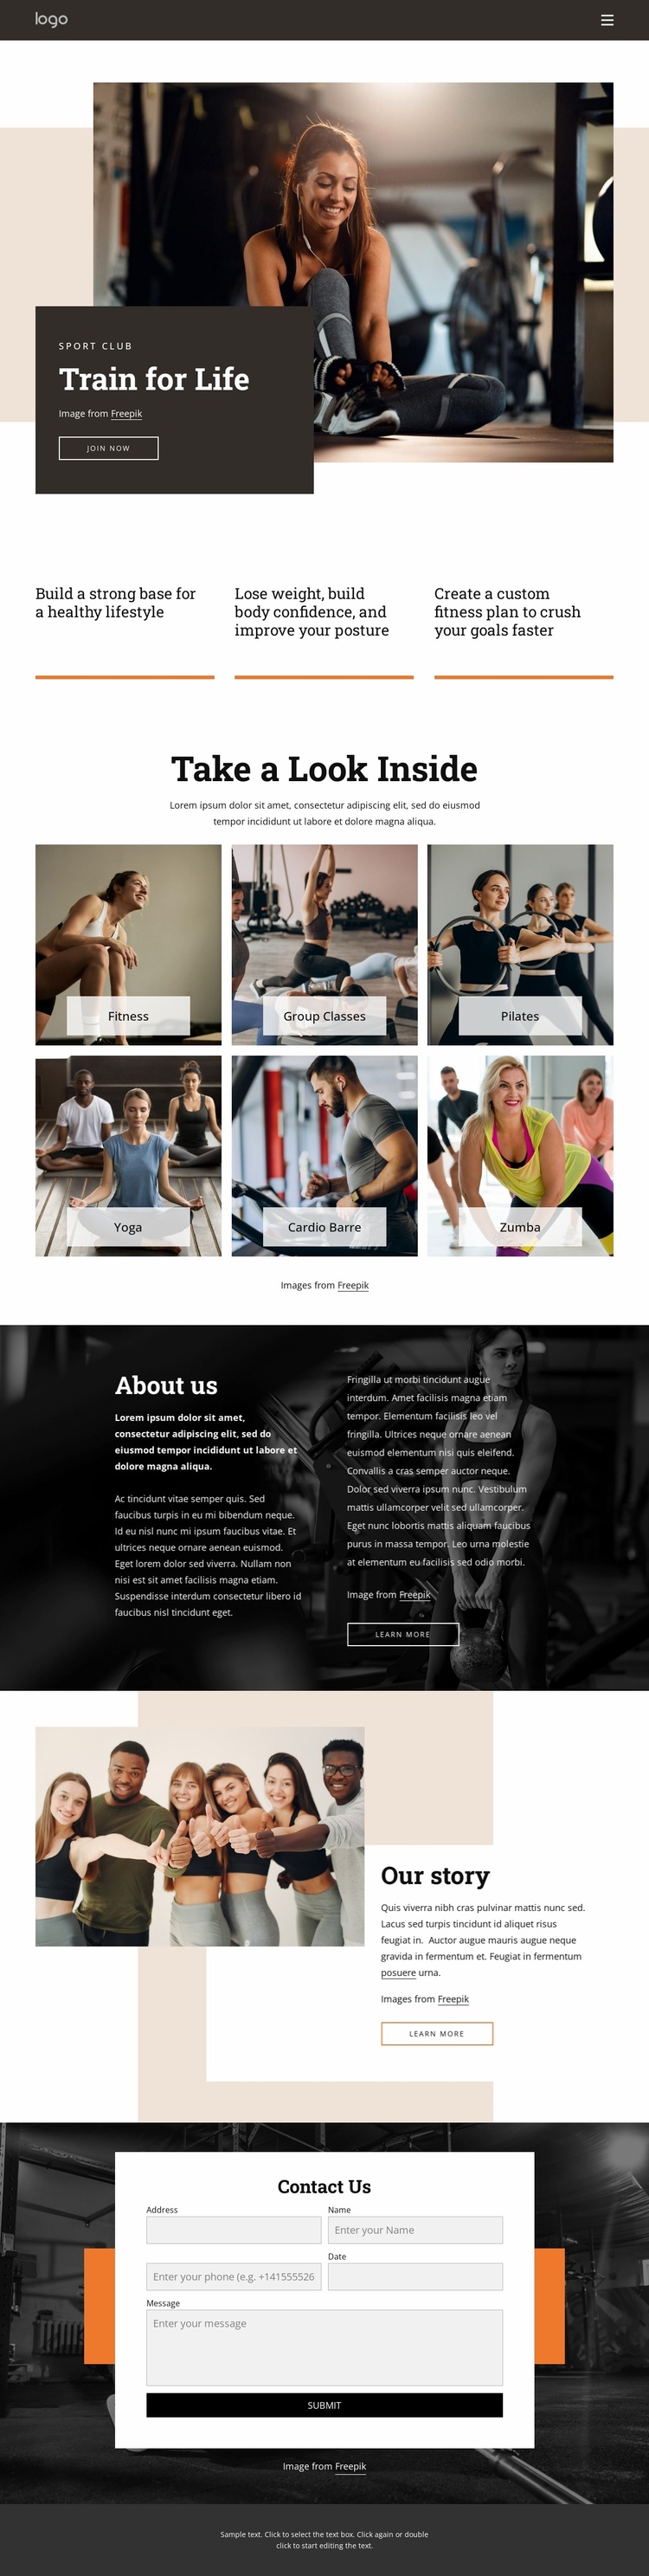 Get moving with our range of classes Landing Page